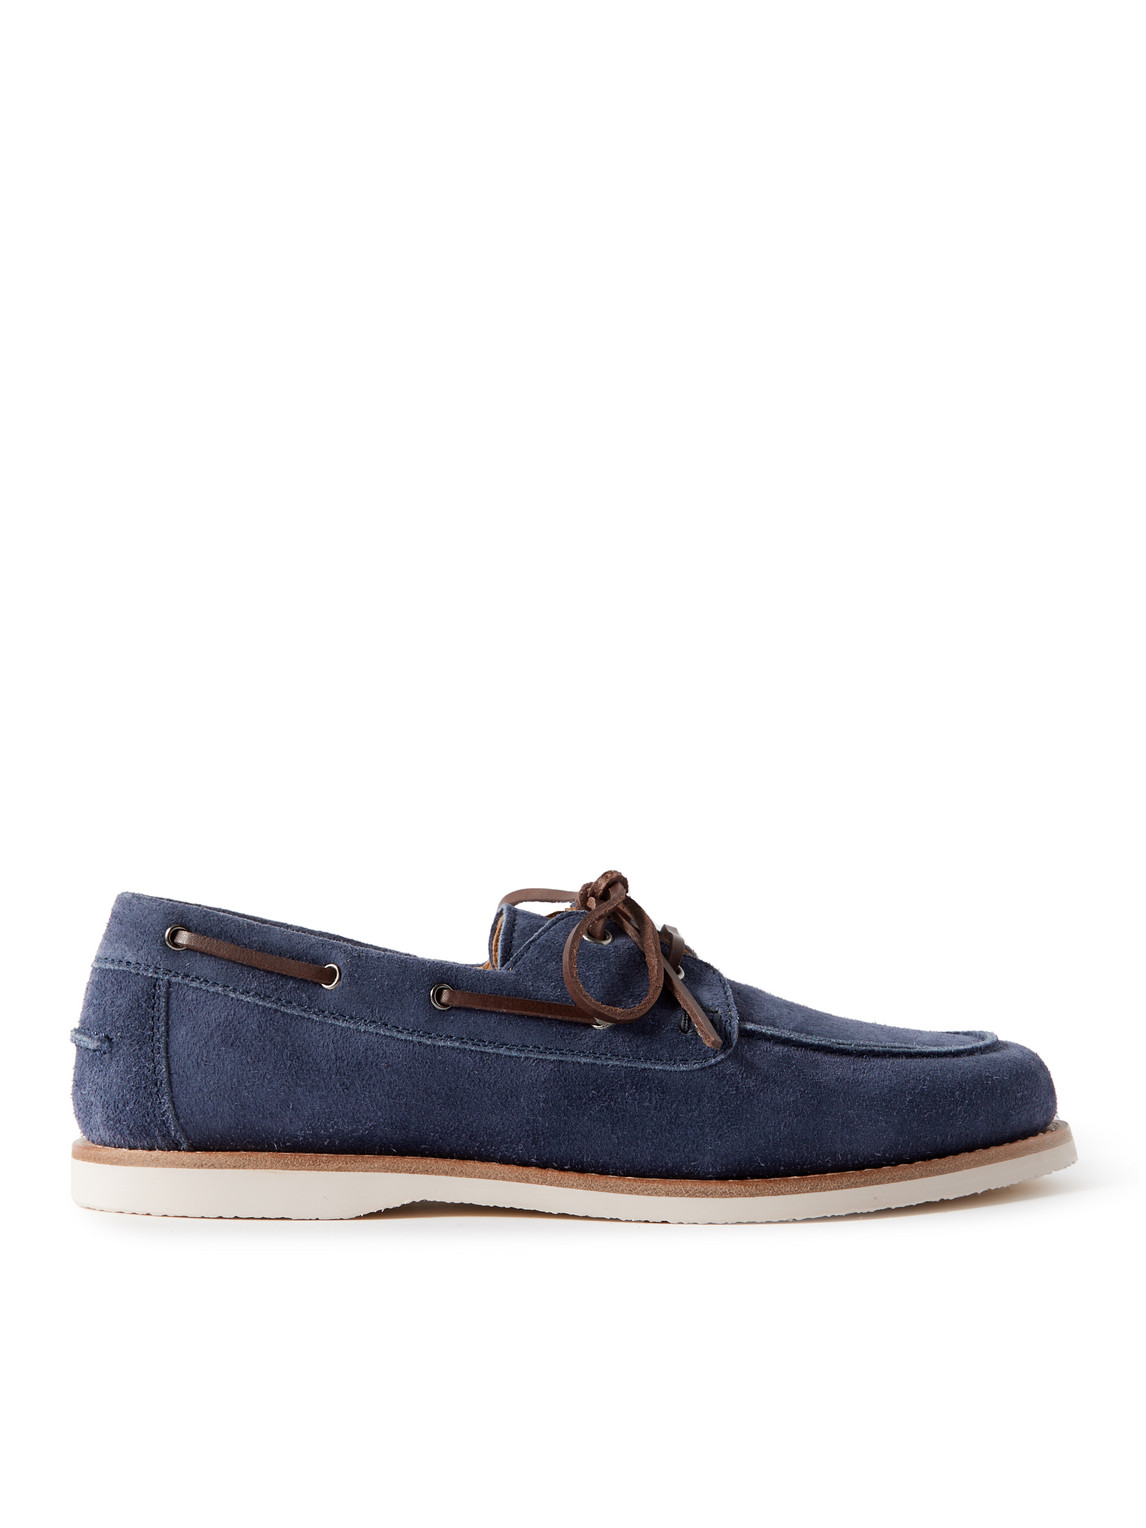 BRUNELLO CUCINELLI LEATHER-TRIMMED SUEDE BOAT SHOES